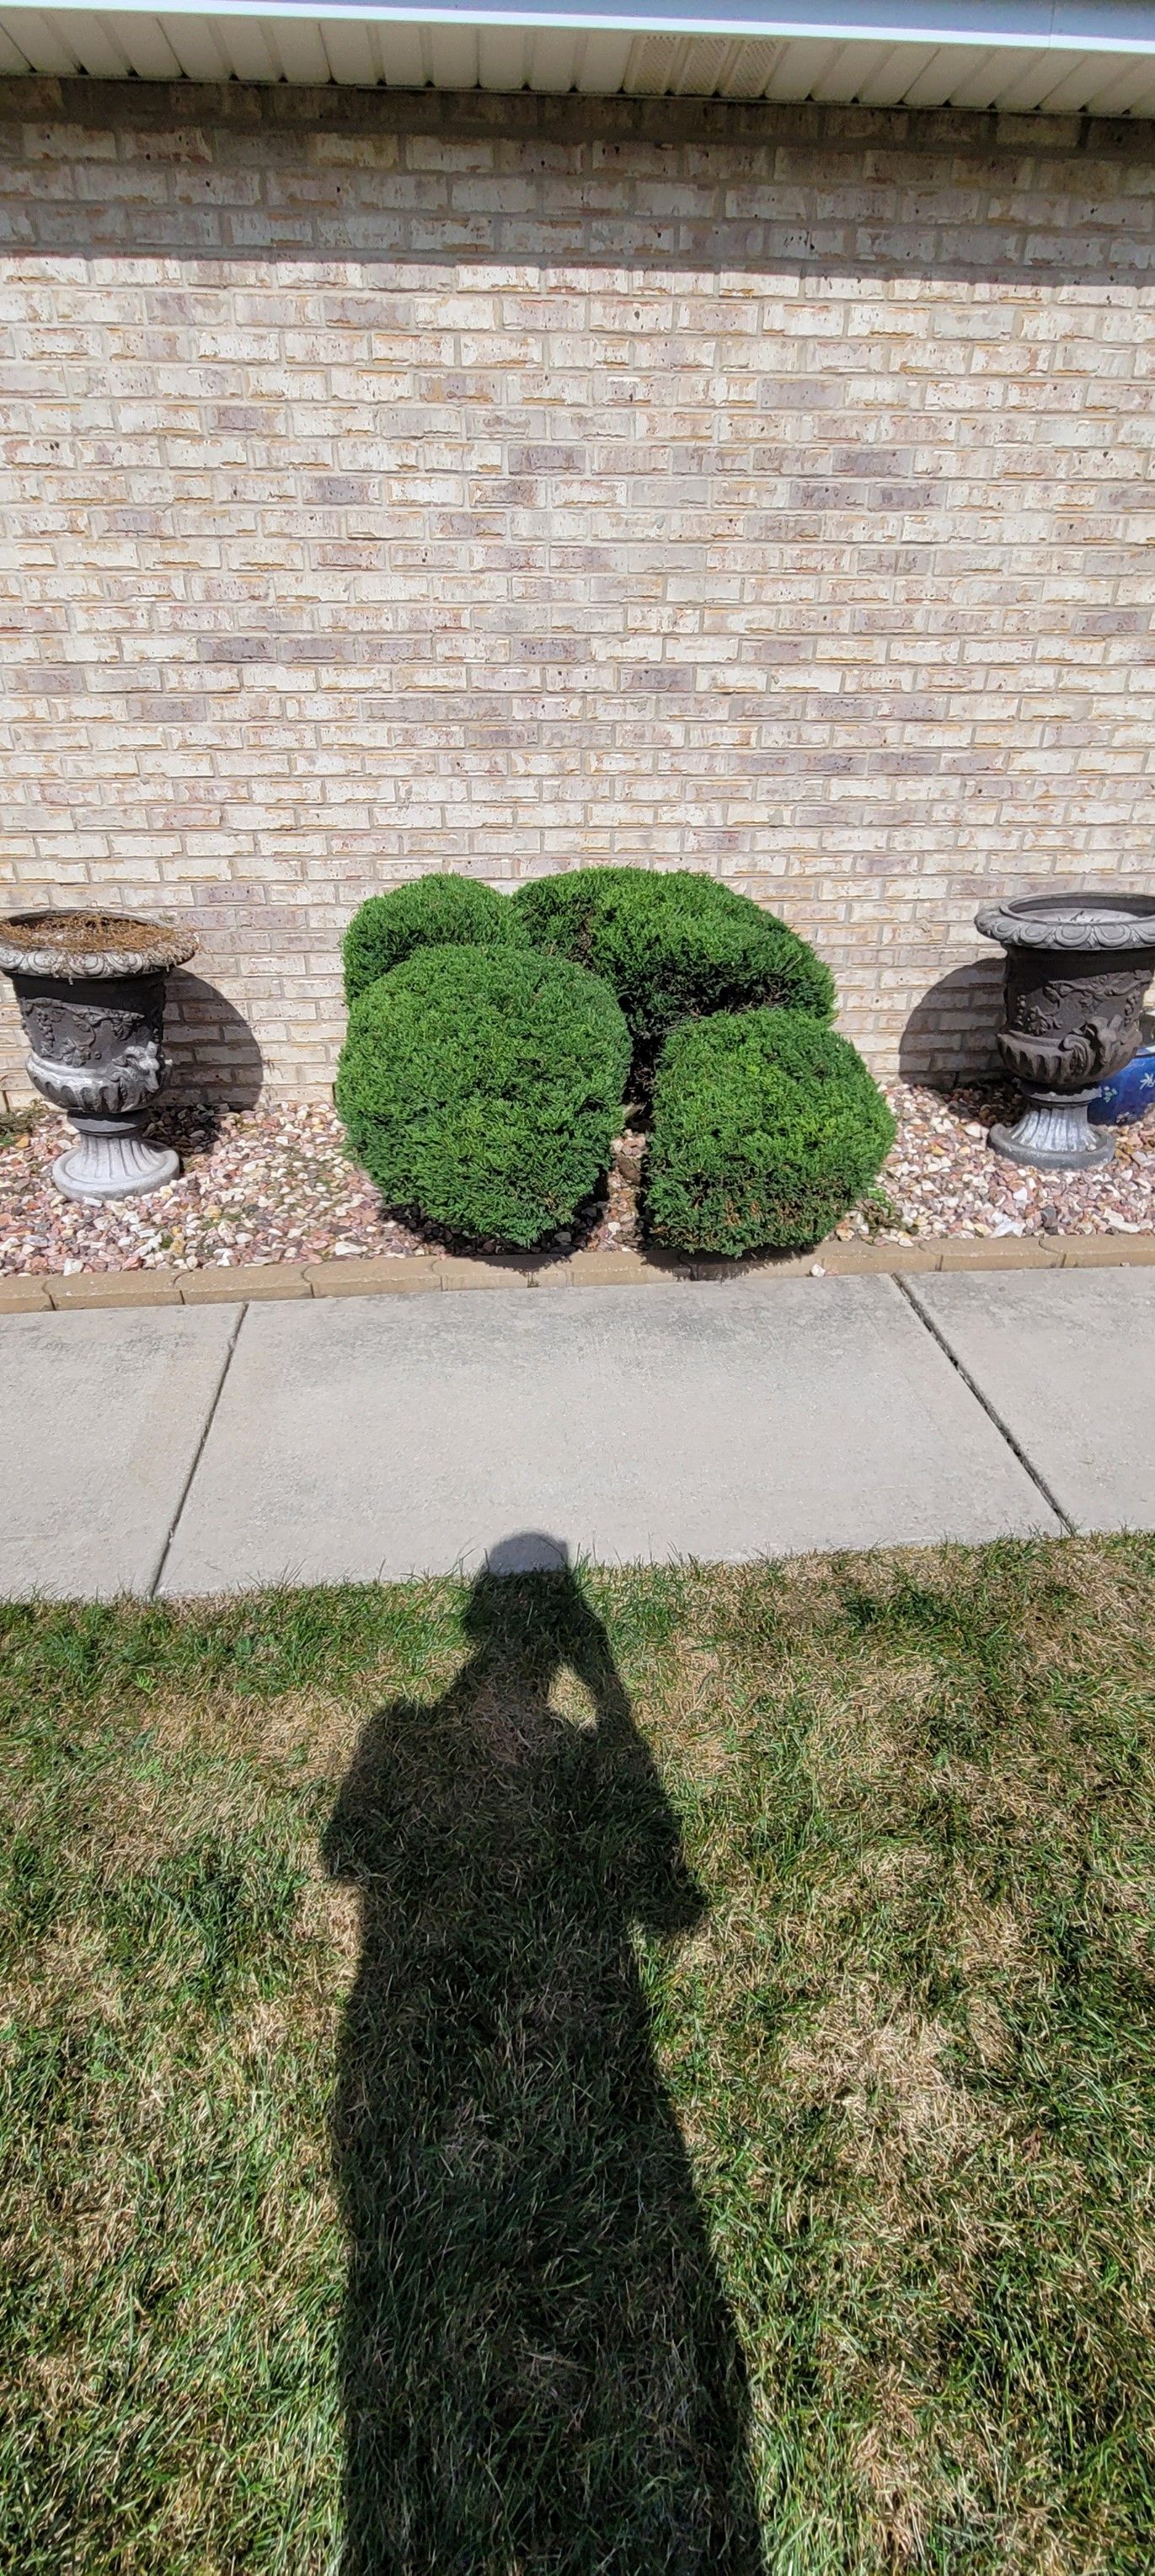 Hardscaping for Sals Lawn and Landscape in Oak Lawn, IL